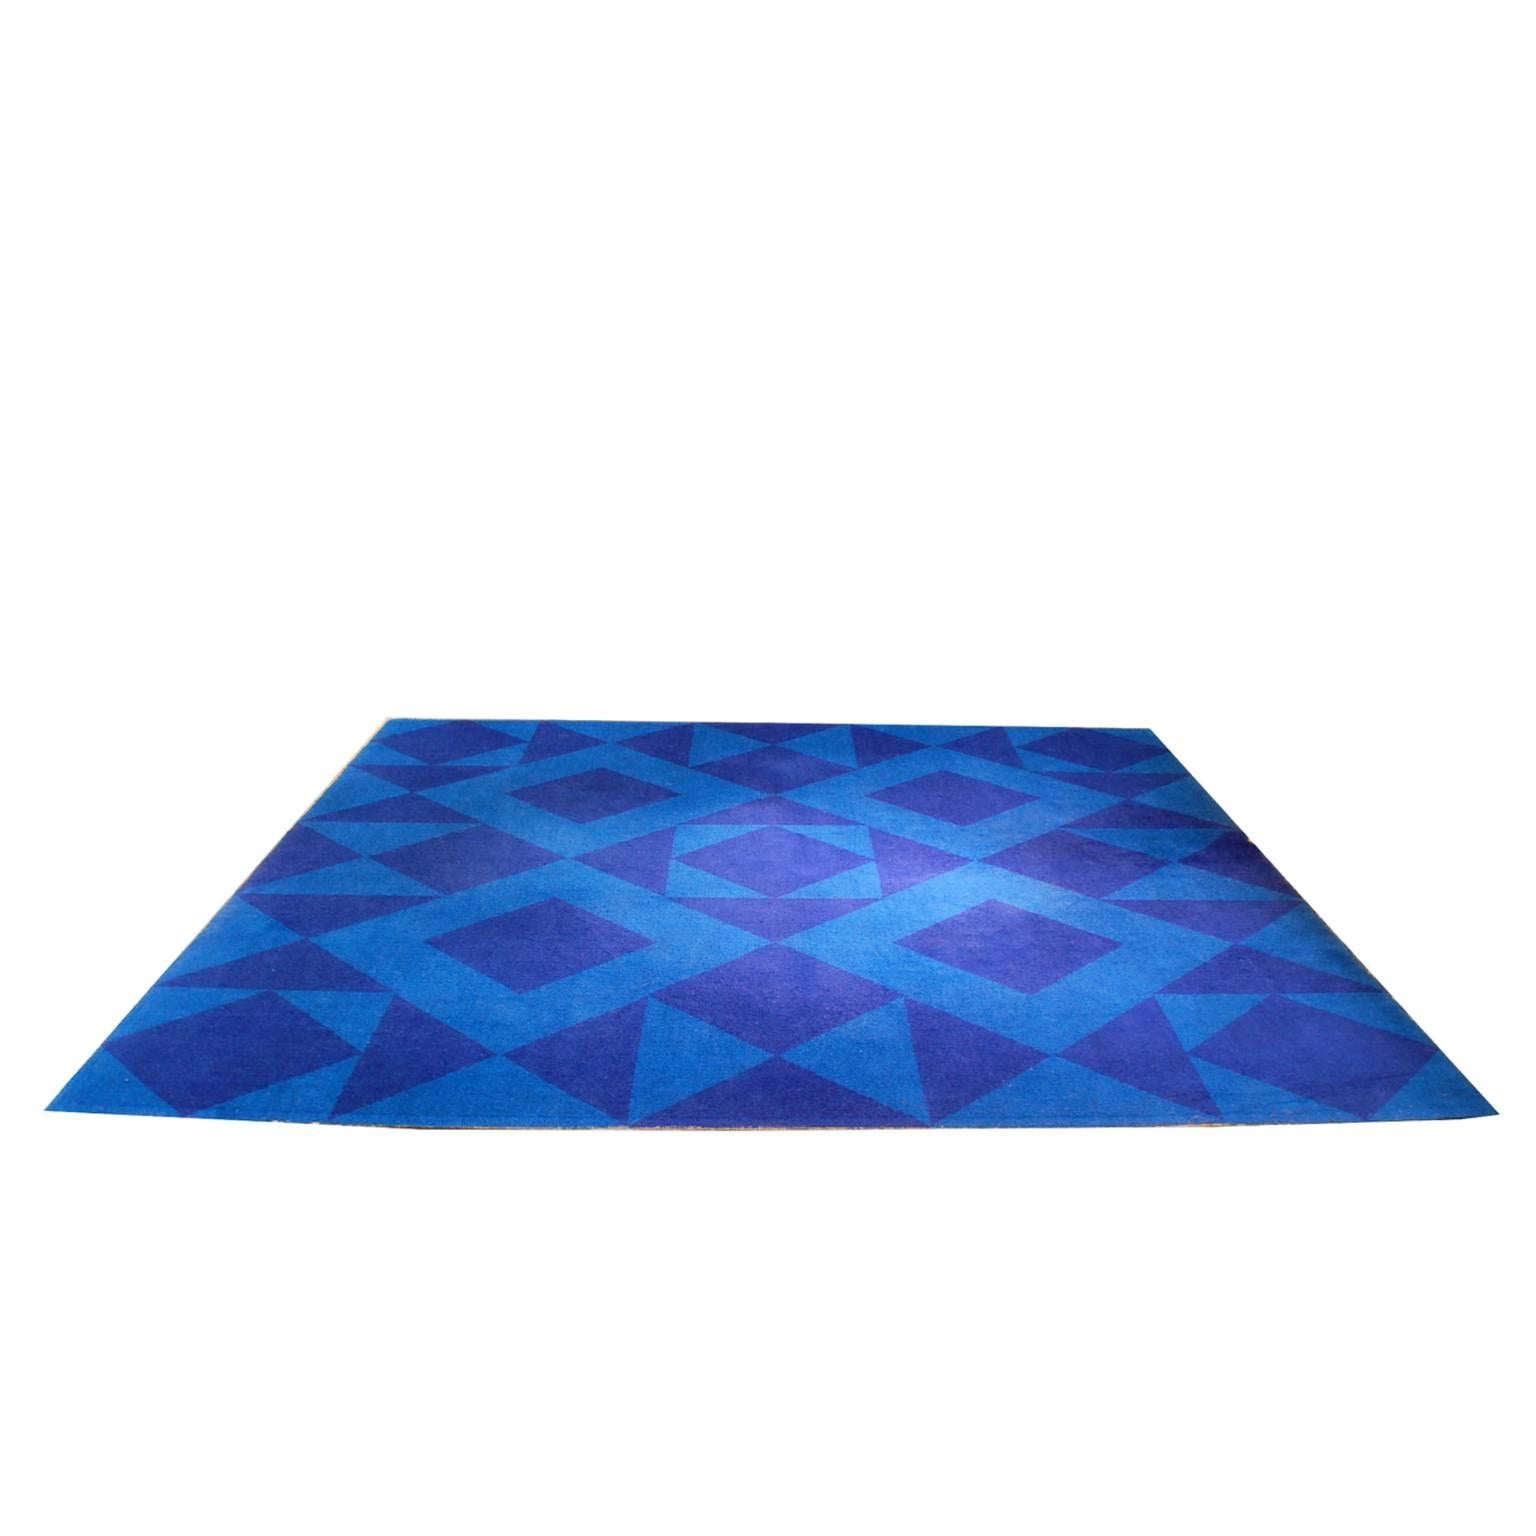 Rare and early carpet by Verner Panton. The design is called Geometri VI and was originally produced as a woolen rya carpet by Unika Vaev in Denmark. This is a synthetic wall to wall version of the same design.